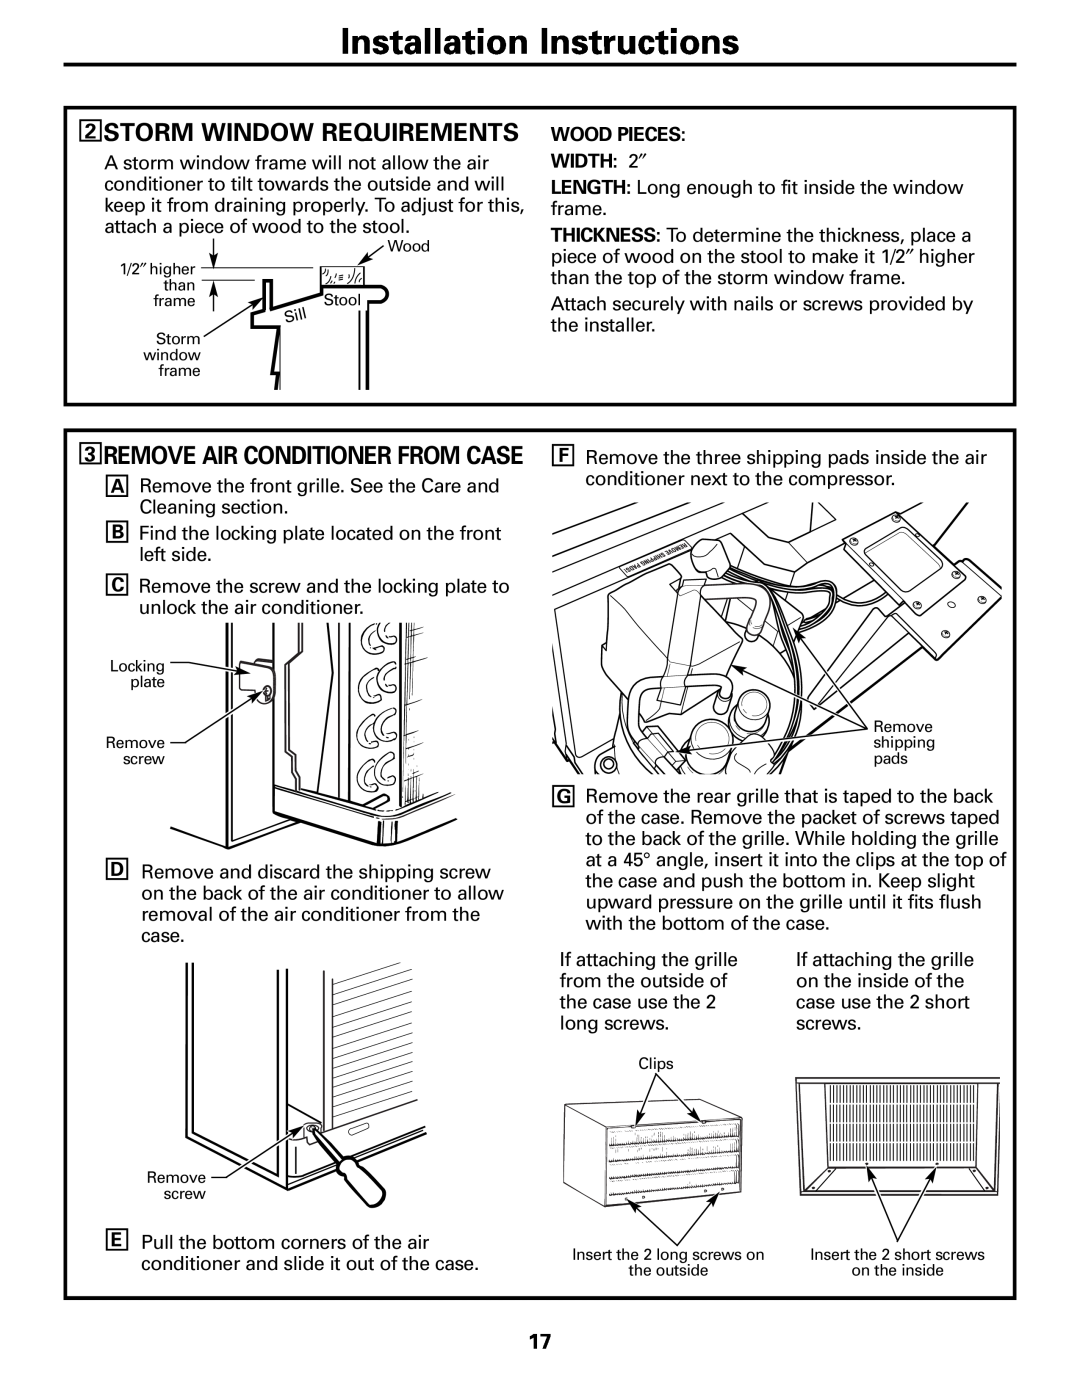 GE Cool Only 2STORM WINDOW REQUIREMENTS, Installation Instructions, 3REMOVE AIR CONDITIONER FROM CASE 